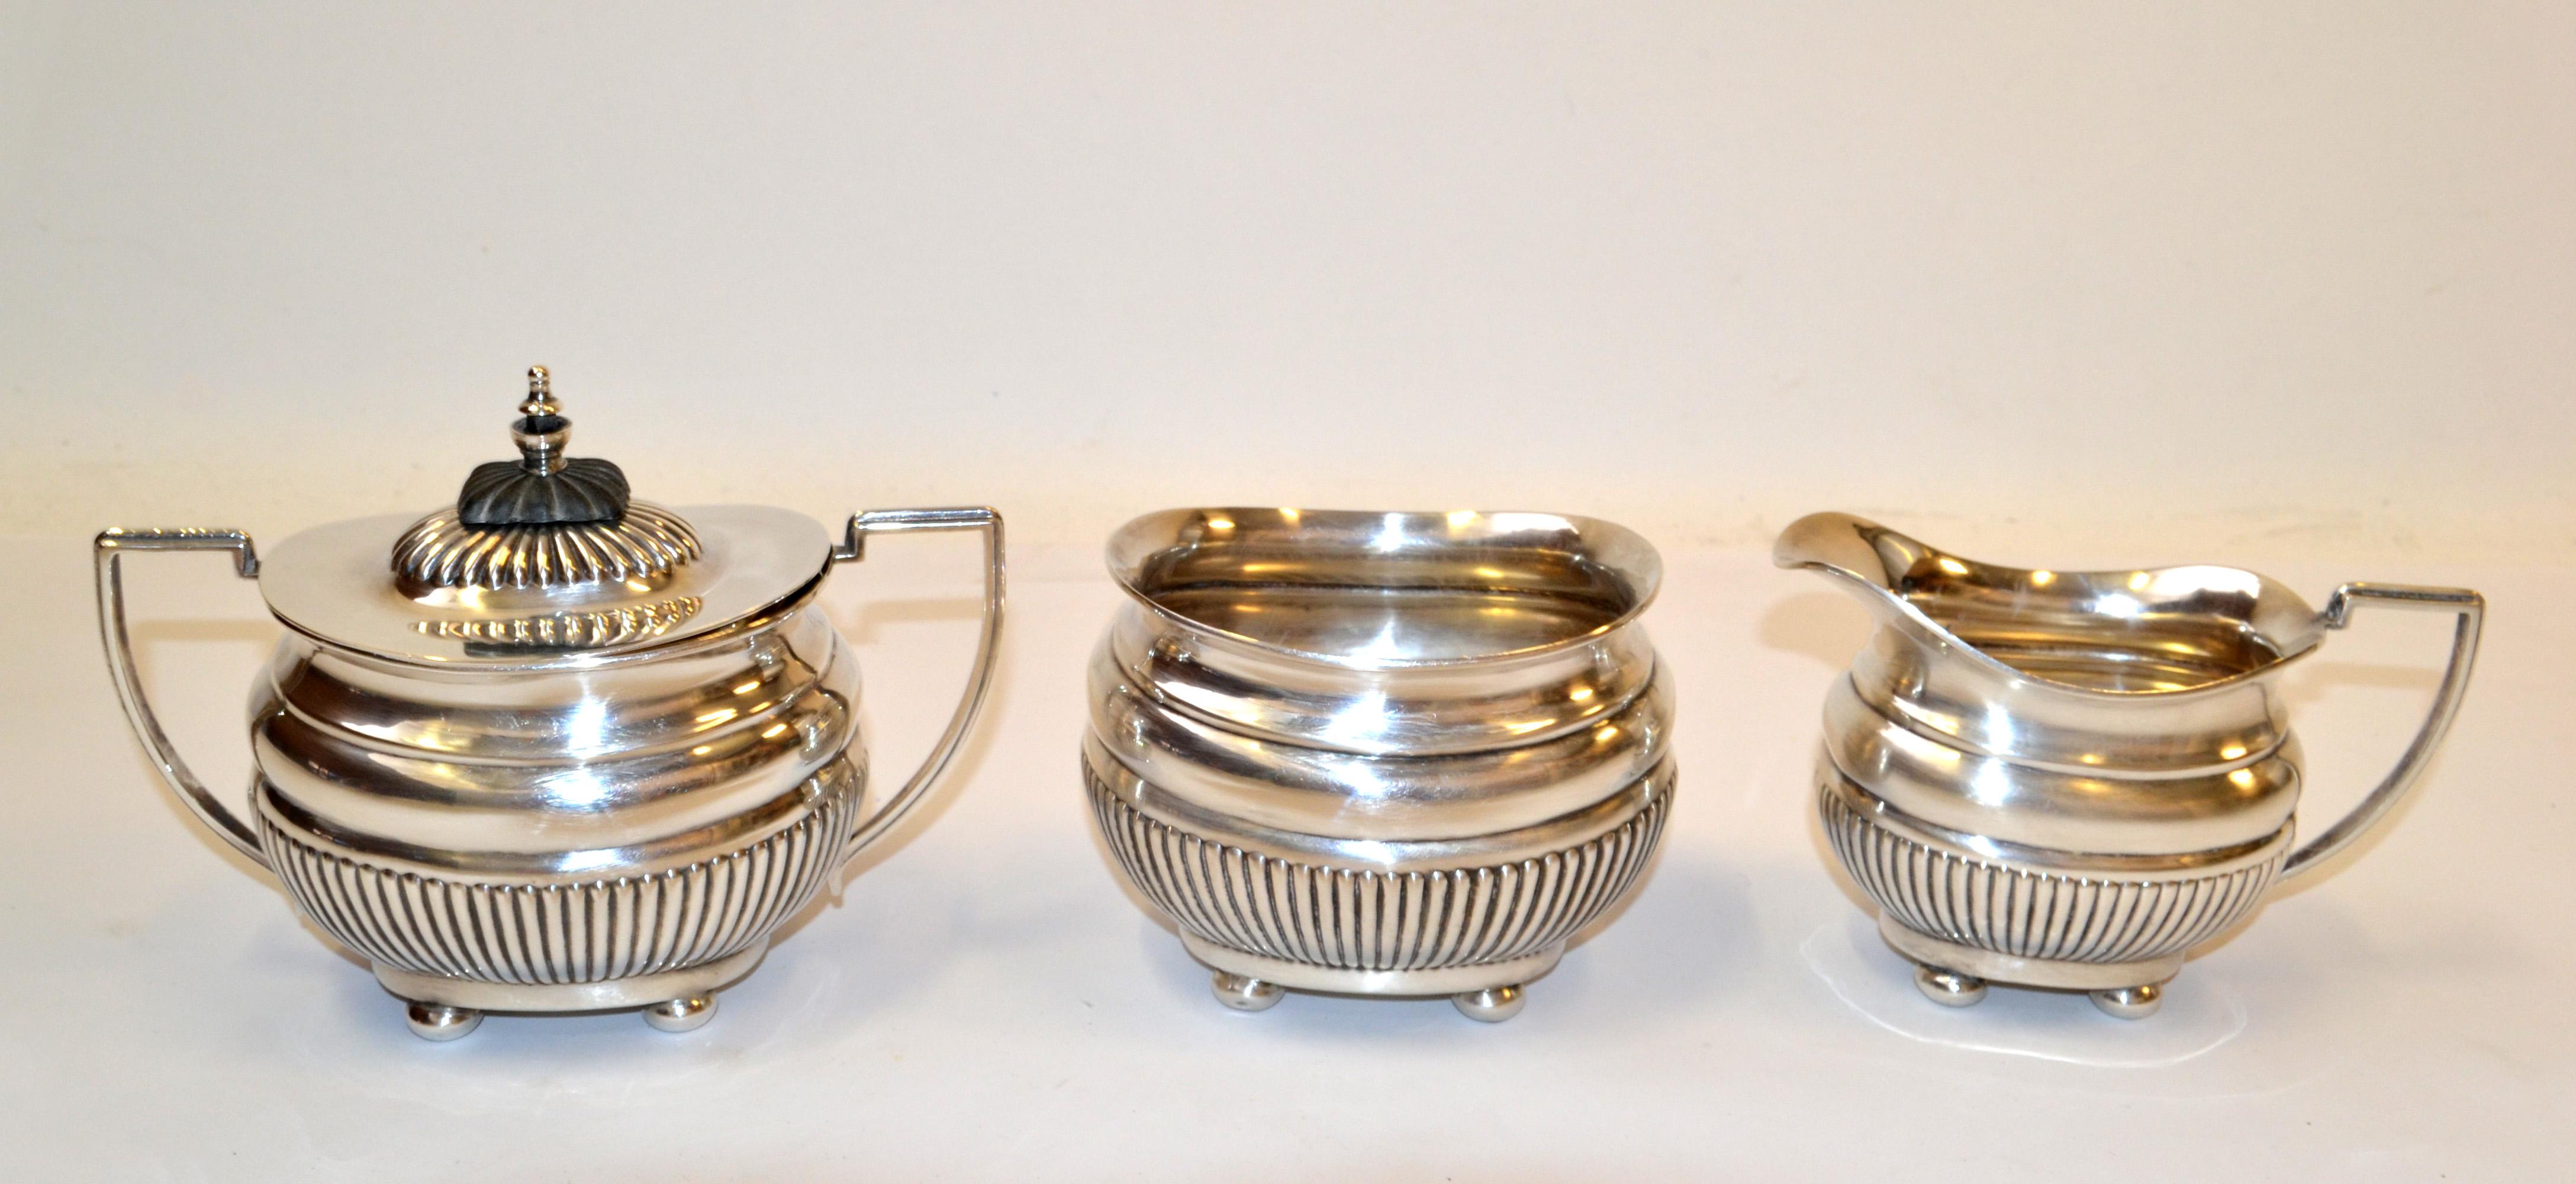 British Colonial Antique 1910 Cheltenham Silver Coffee Service Sheffield England For Sale 7